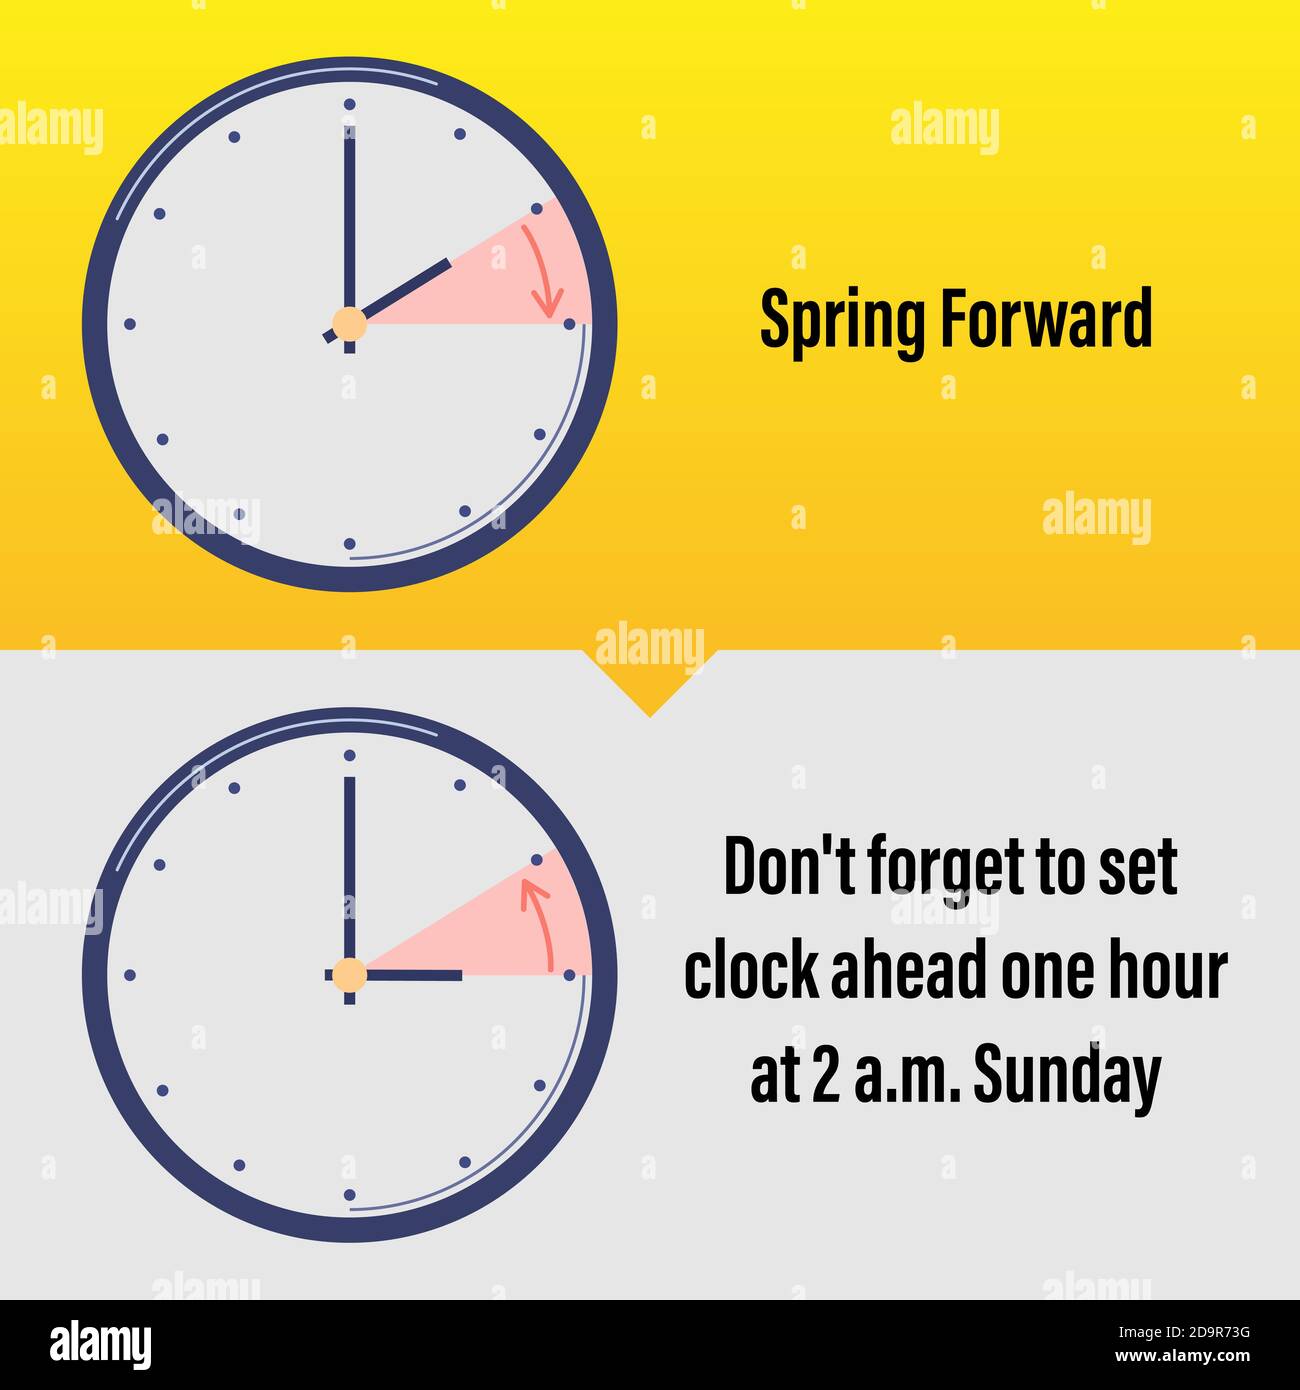 Daylight saving time instruction. Winter and summer time change. Stock  Vector